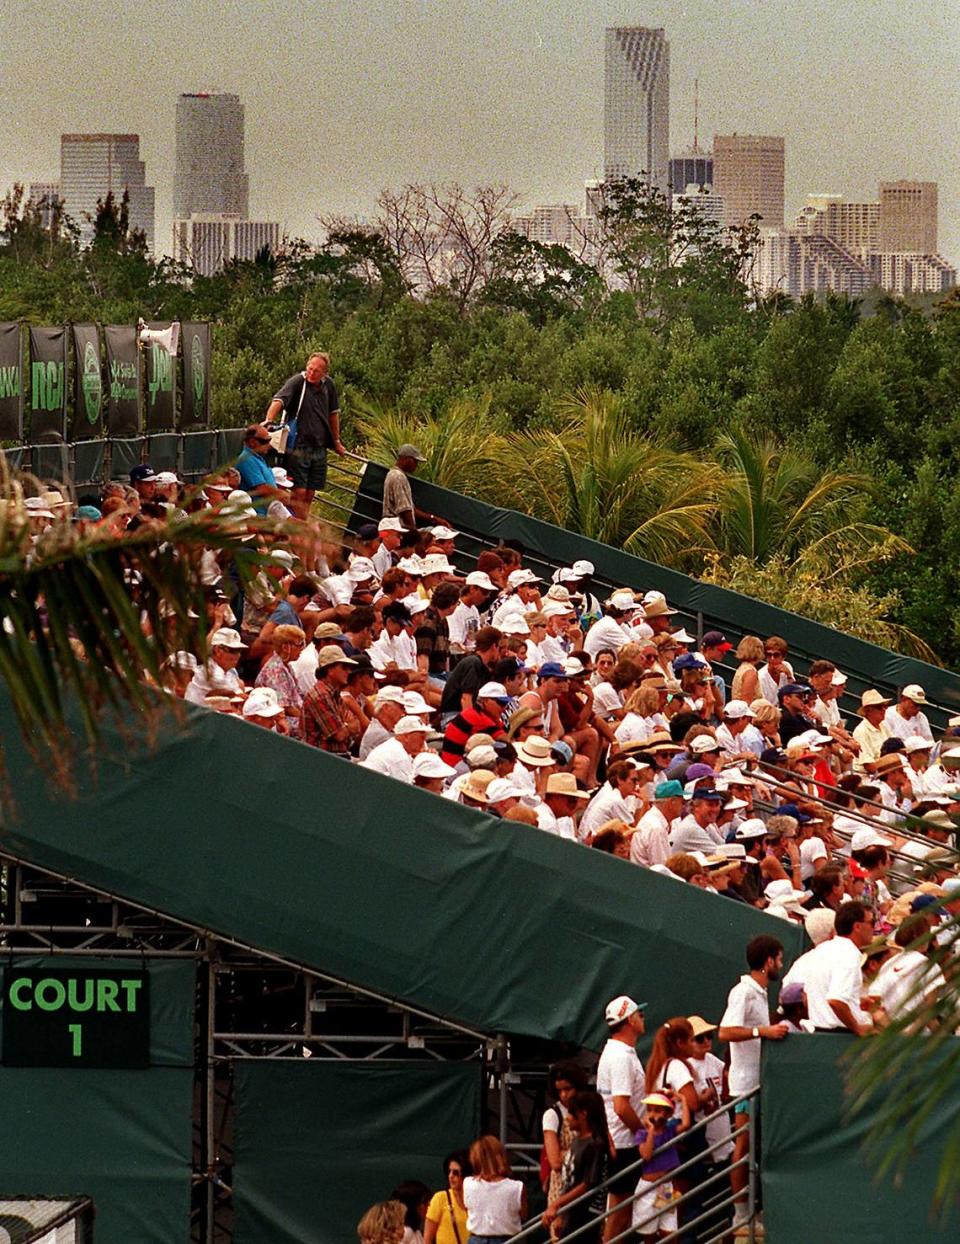 In 1997, her at the first day of the Lipton Tennis Tournament at Key Biscayne. Downtown Miami is in the background.